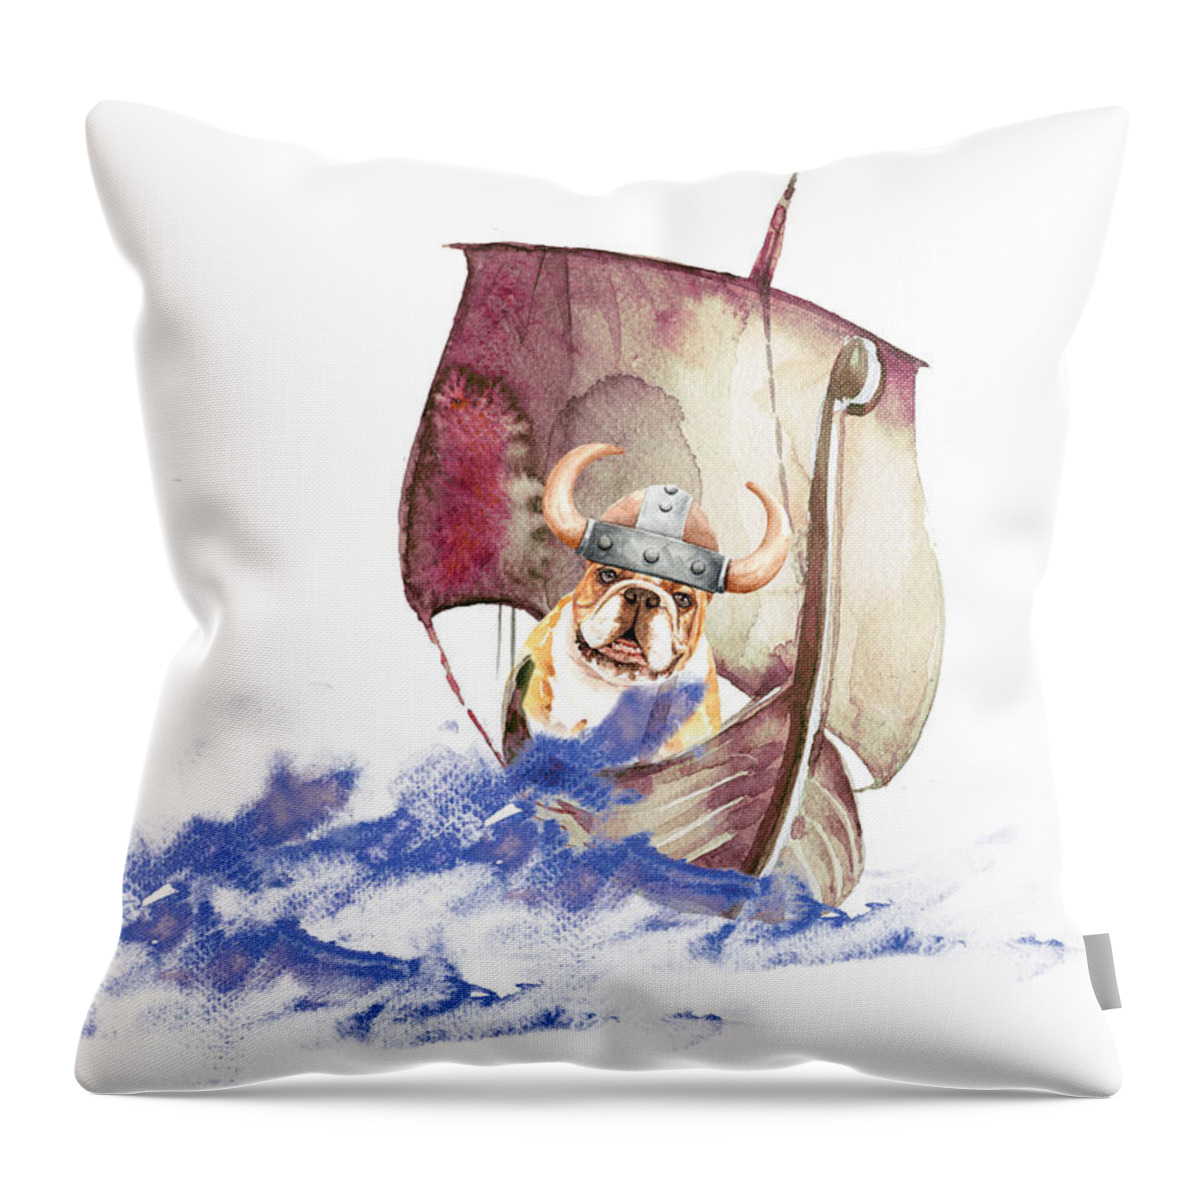 Fun Throw Pillow featuring the painting The Vikings Are Arriving by Miki De Goodaboom